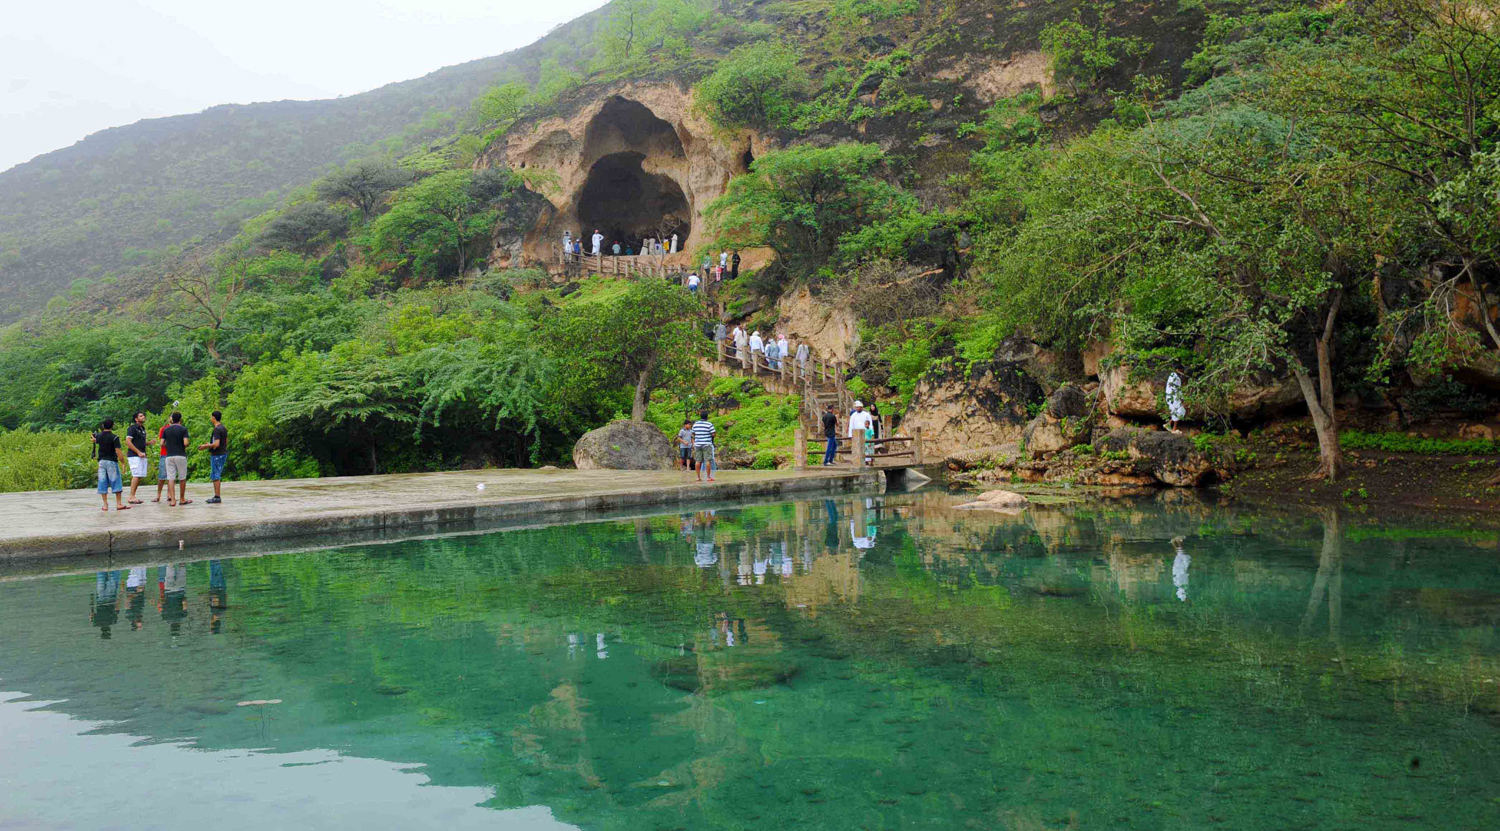 Known for its breathtaking beaches, mesmerizing mountains, and ancient history, Salalah city in Oman is considered one of the chief touristic attractions in the region